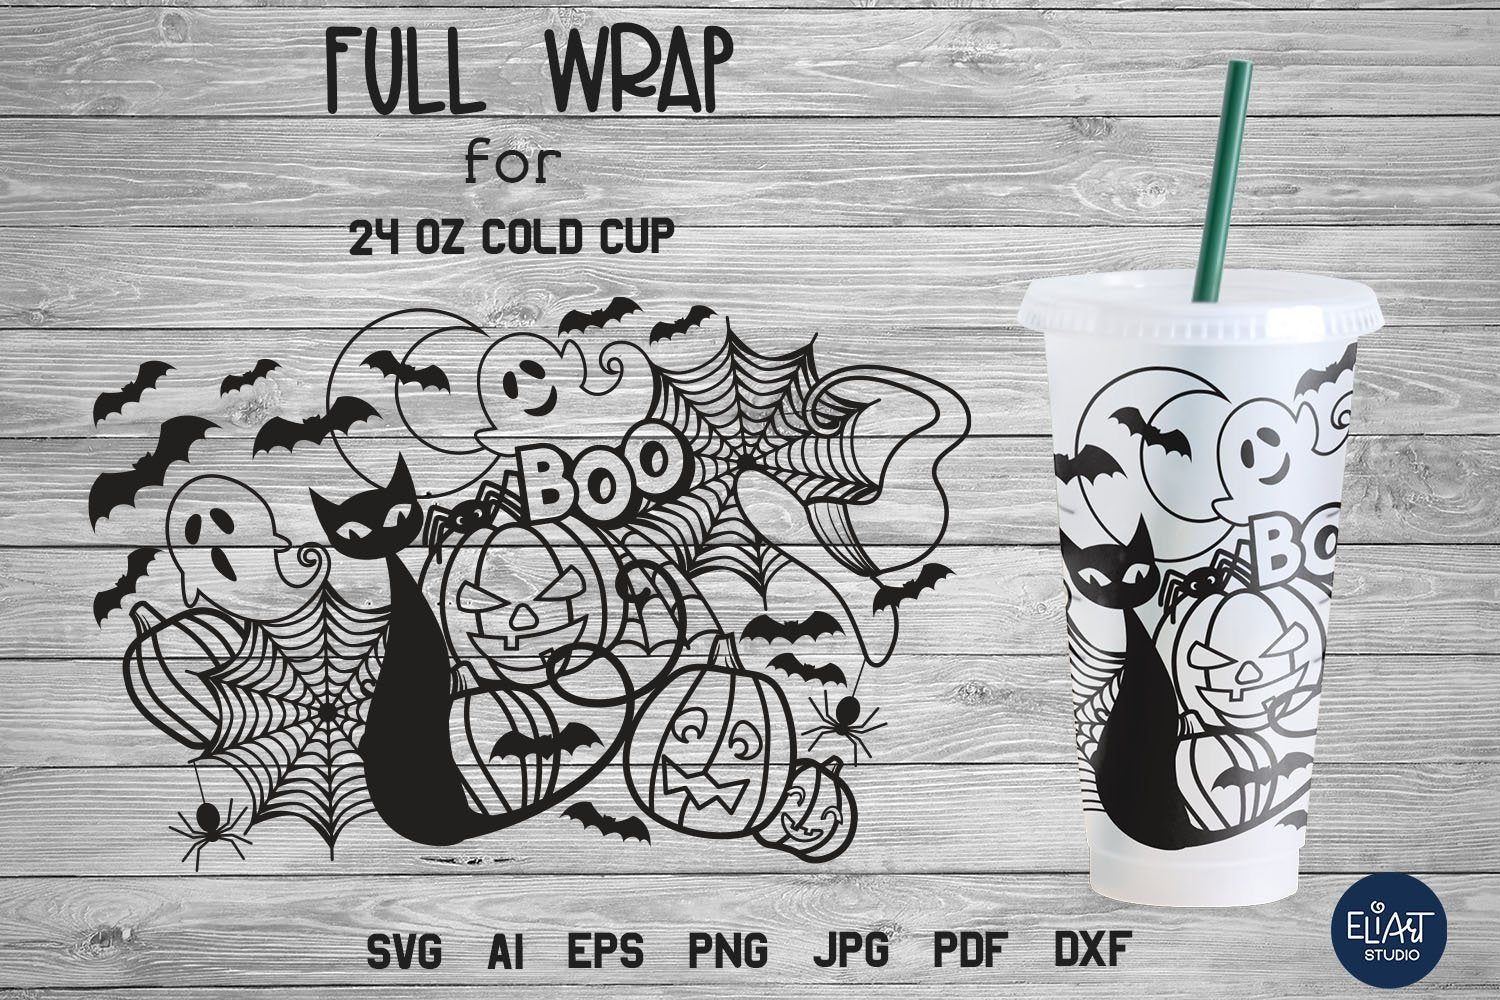 Halloween Cold Cup Wrap SVG Graphic by Lemon Chili · Creative Fabrica